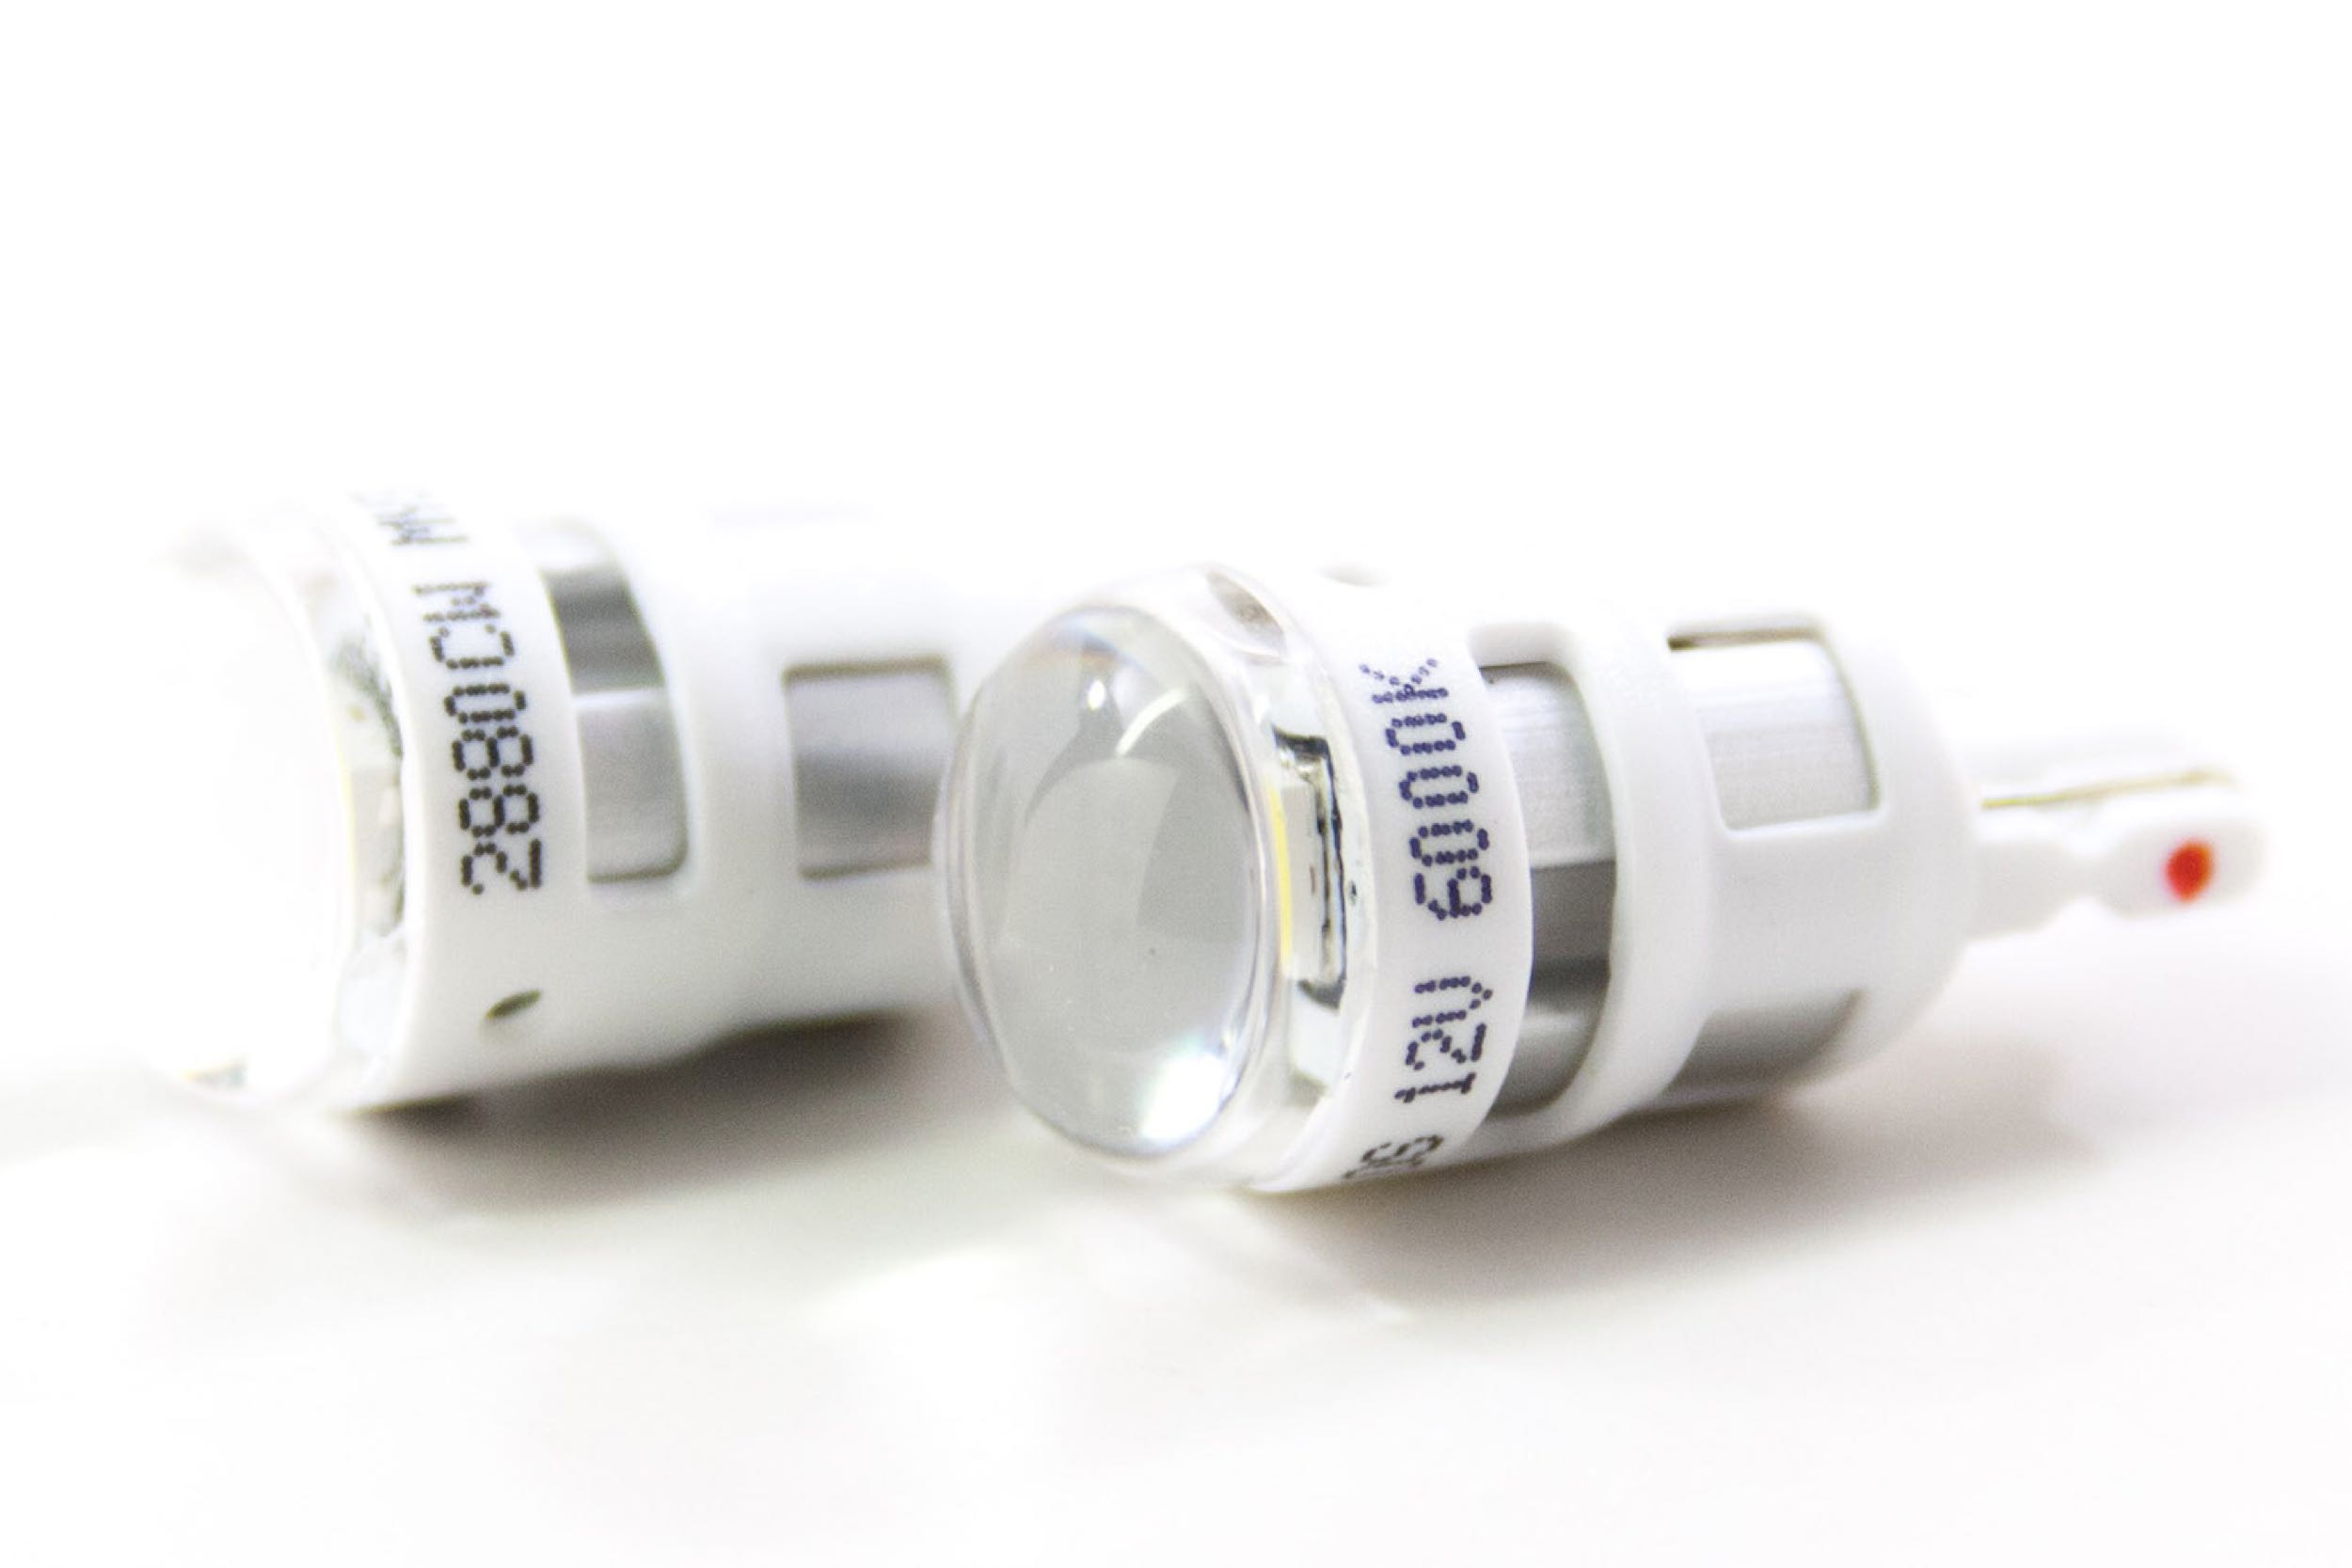 T10194 Osram Ledriving Cool White Automotive Led Bulbs From The pertaining to dimensions 2500 X 1667